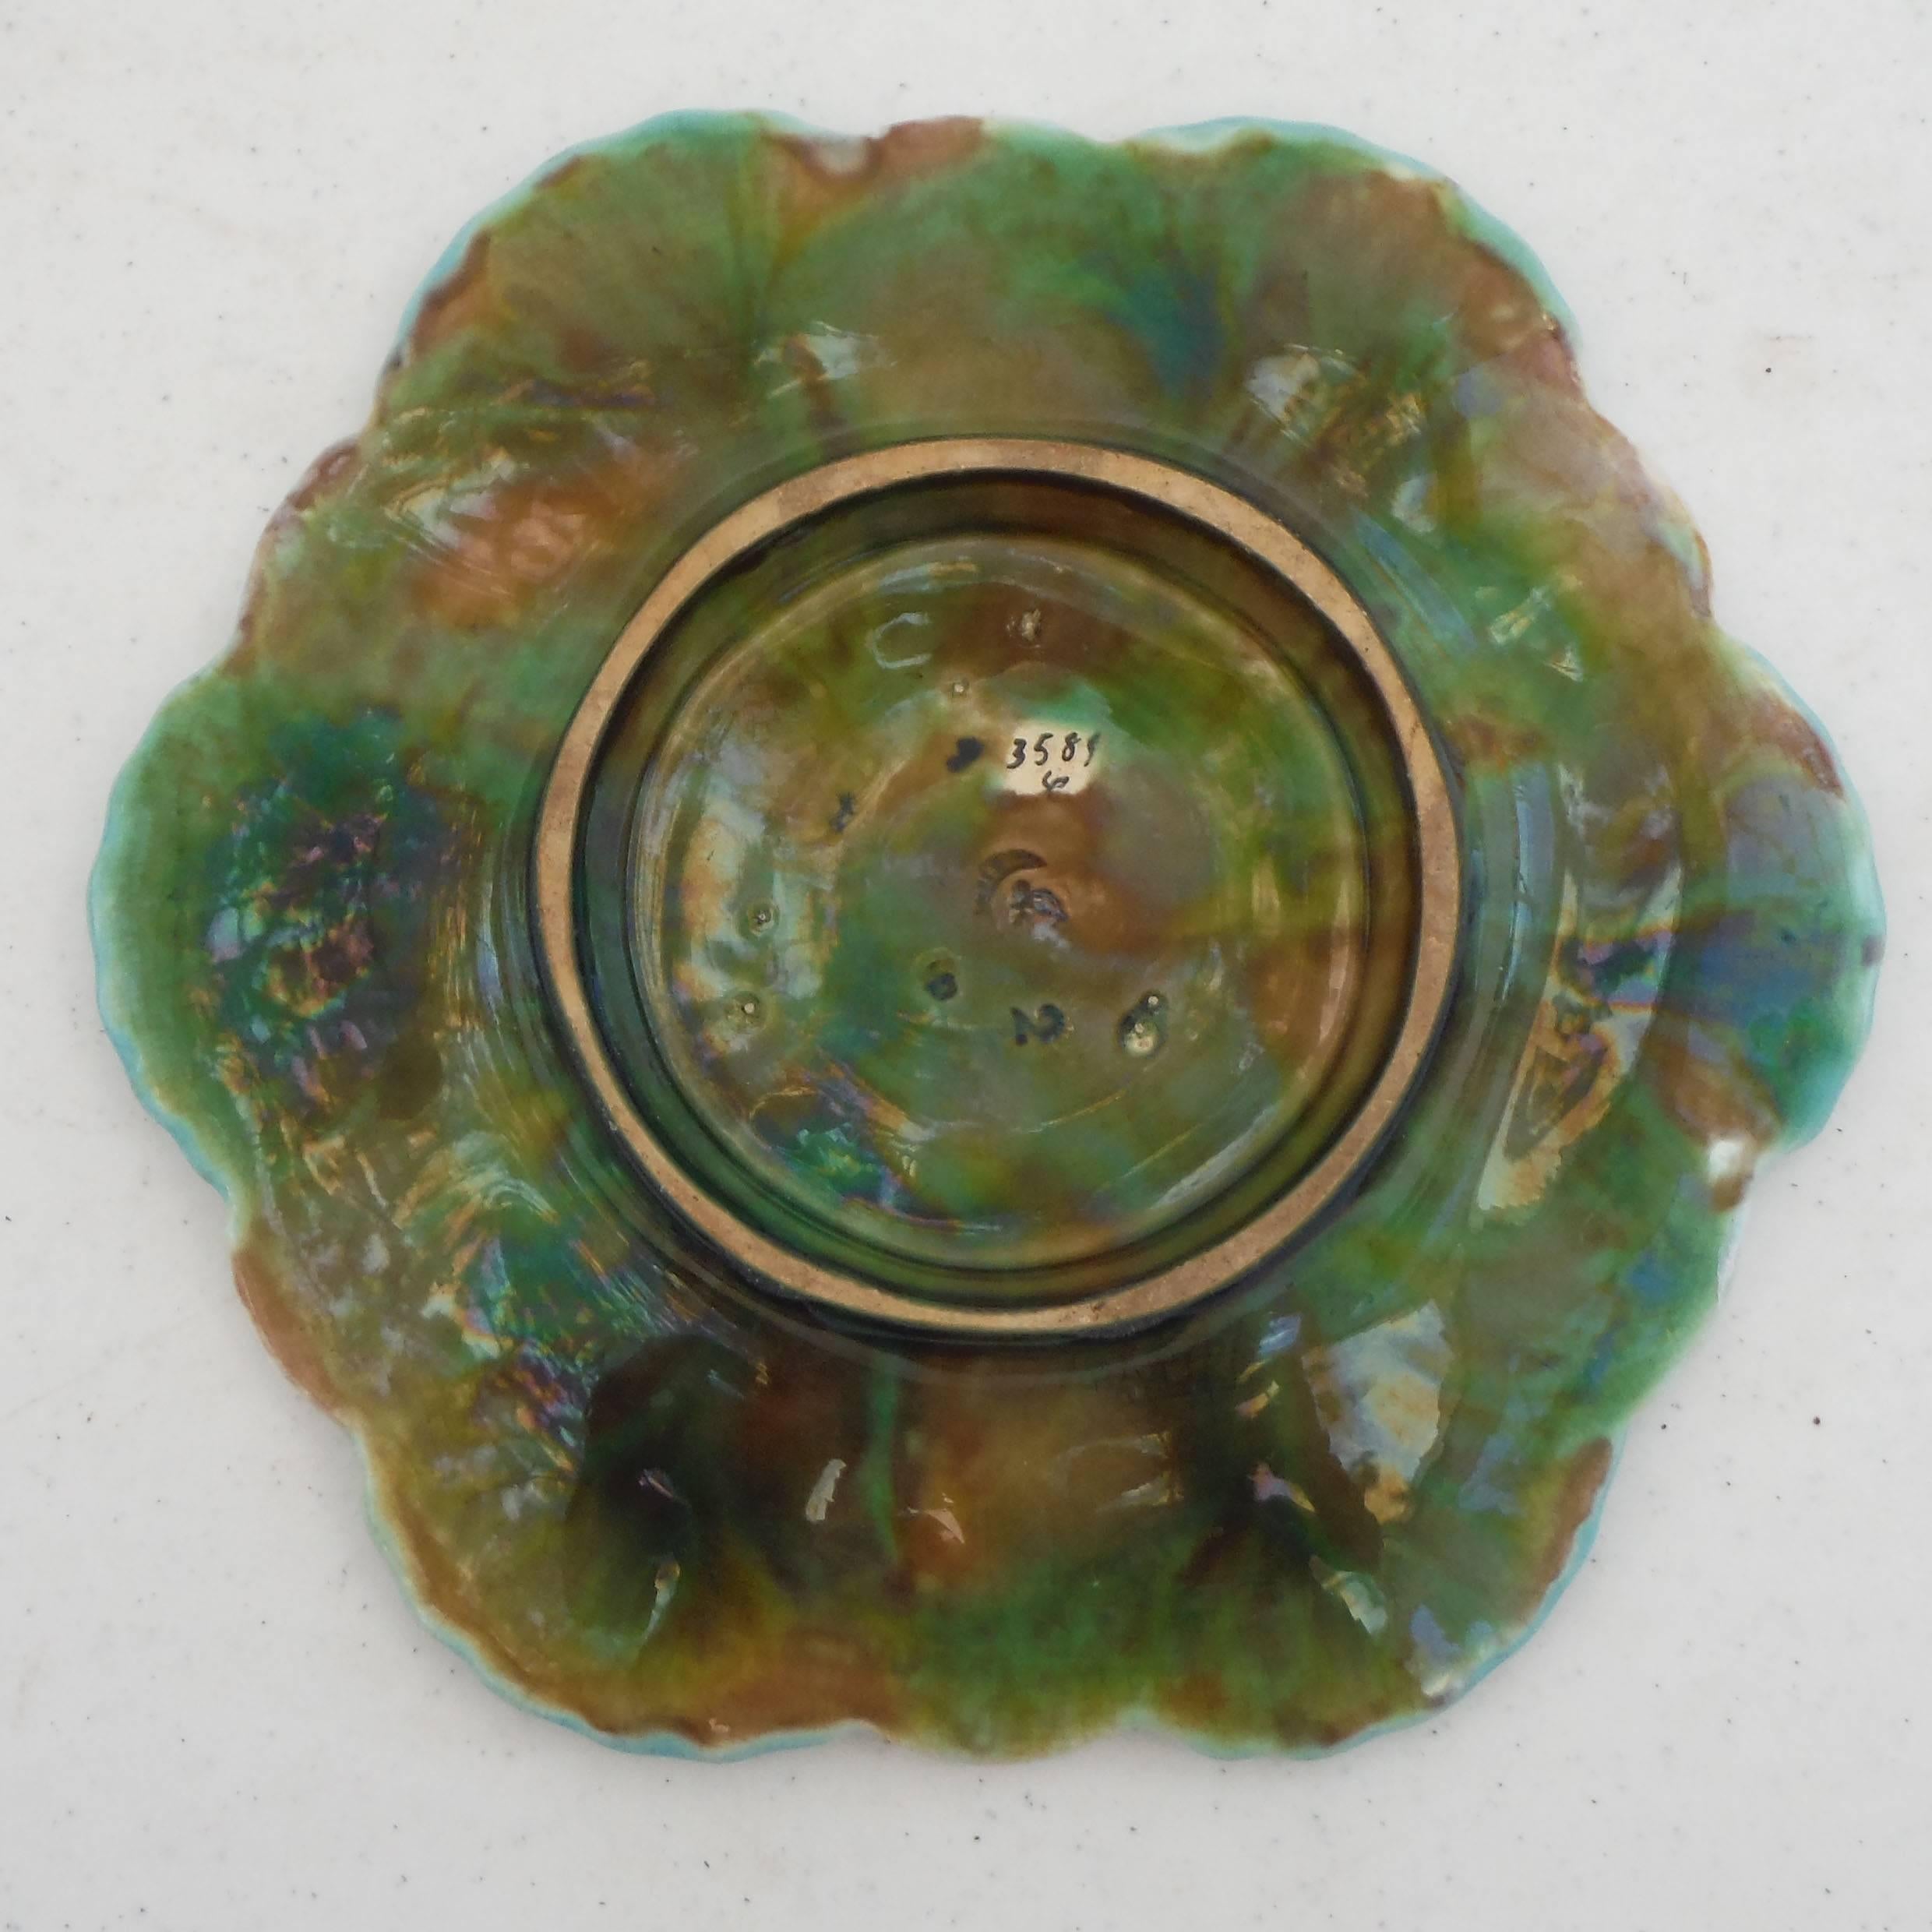 Antique English turquoise Majolica oyster plate signed George Jones, circa 1878.
This six well oyster plate is a fine example of the work of George Jones, with a beautiful glaze and aqua color. The details of the plate with different kinds of